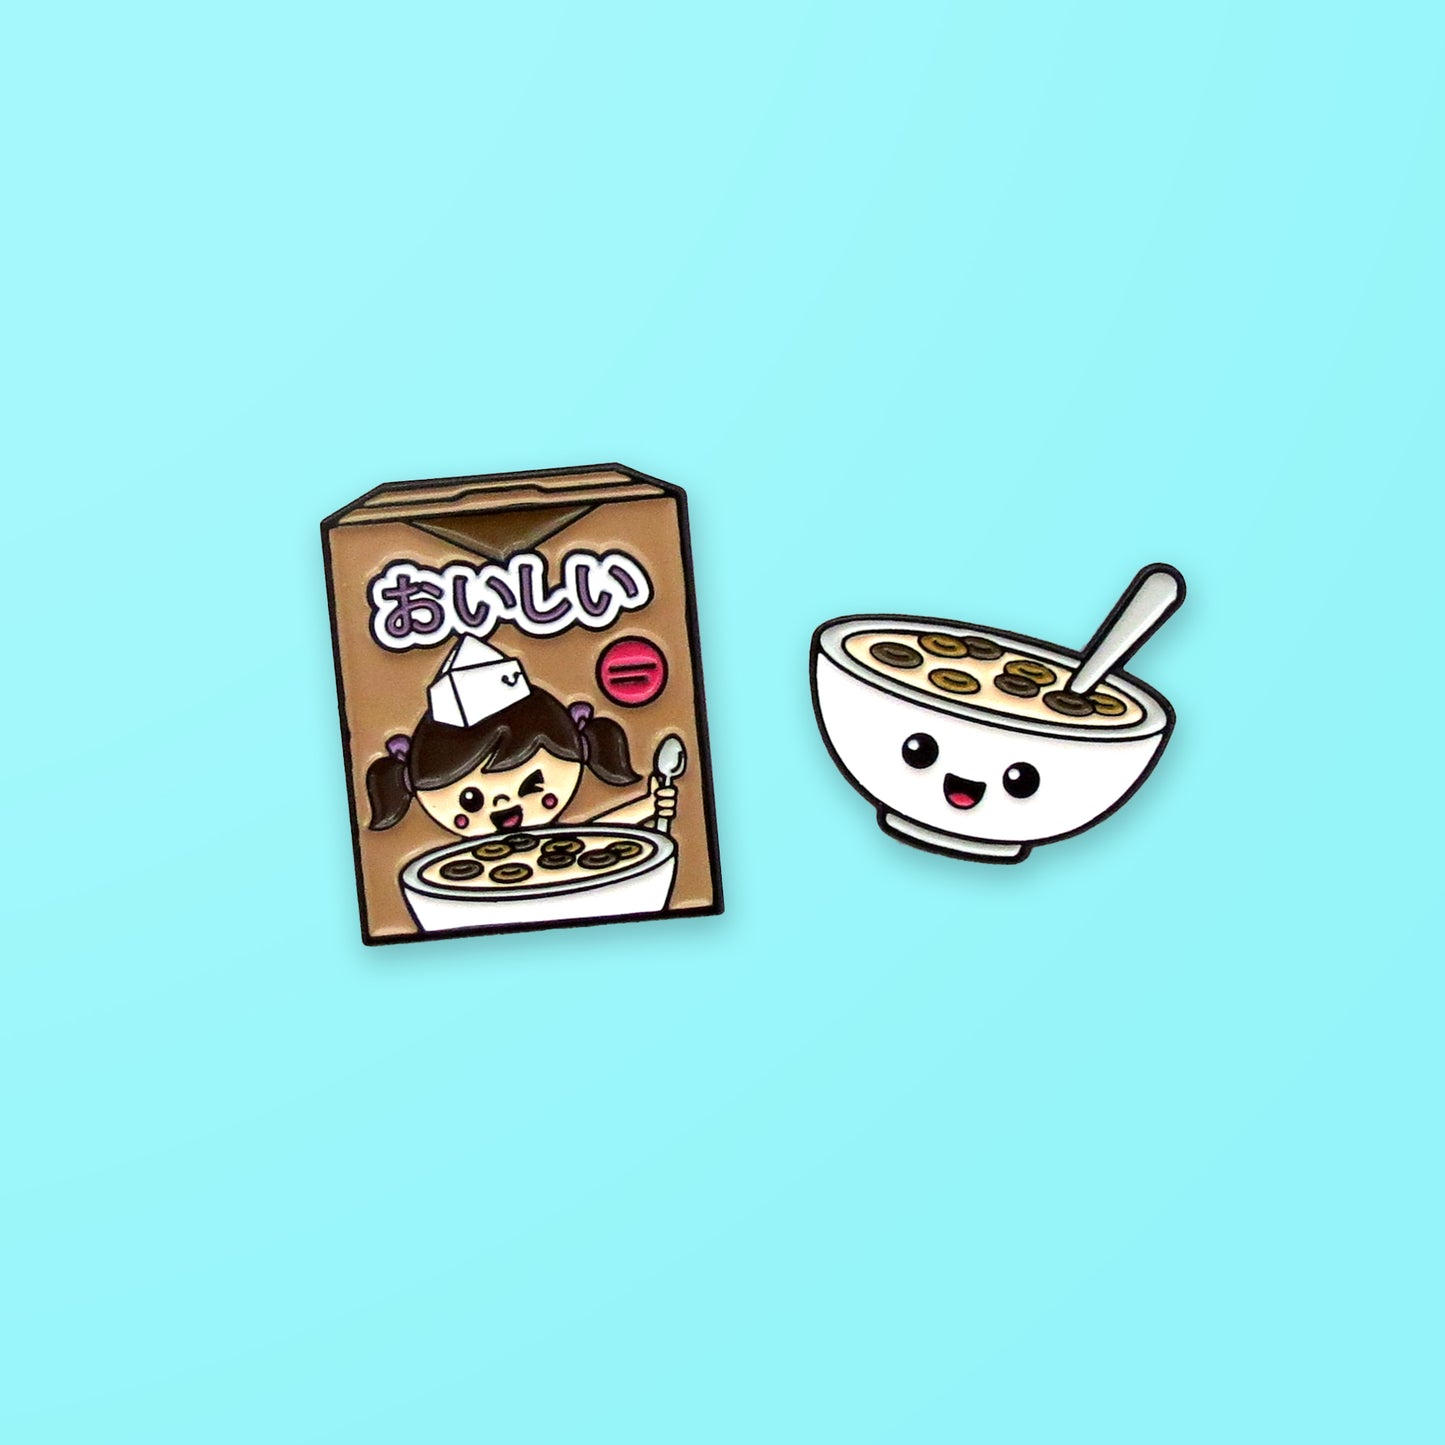 Cocoa Cereal Box and Cereal Bowl enamel pin set on blue background